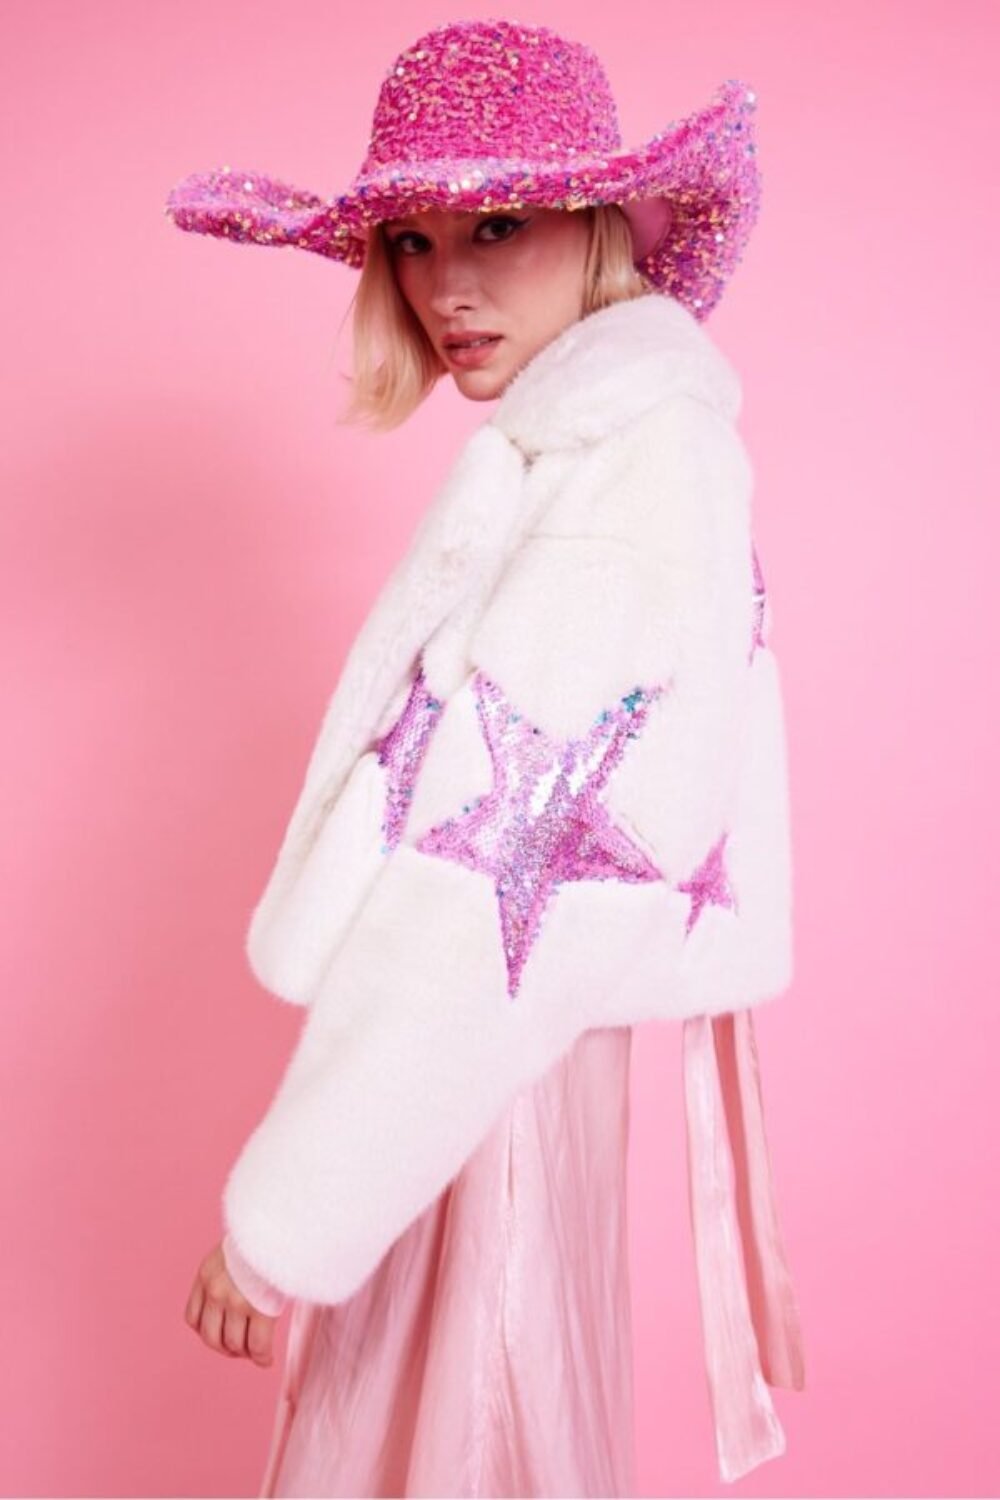 Shop Lux White Bamboo Faux Fur Sequins Star Jacket and women's luxury and designer clothes at www.lux-apparel.co.uk